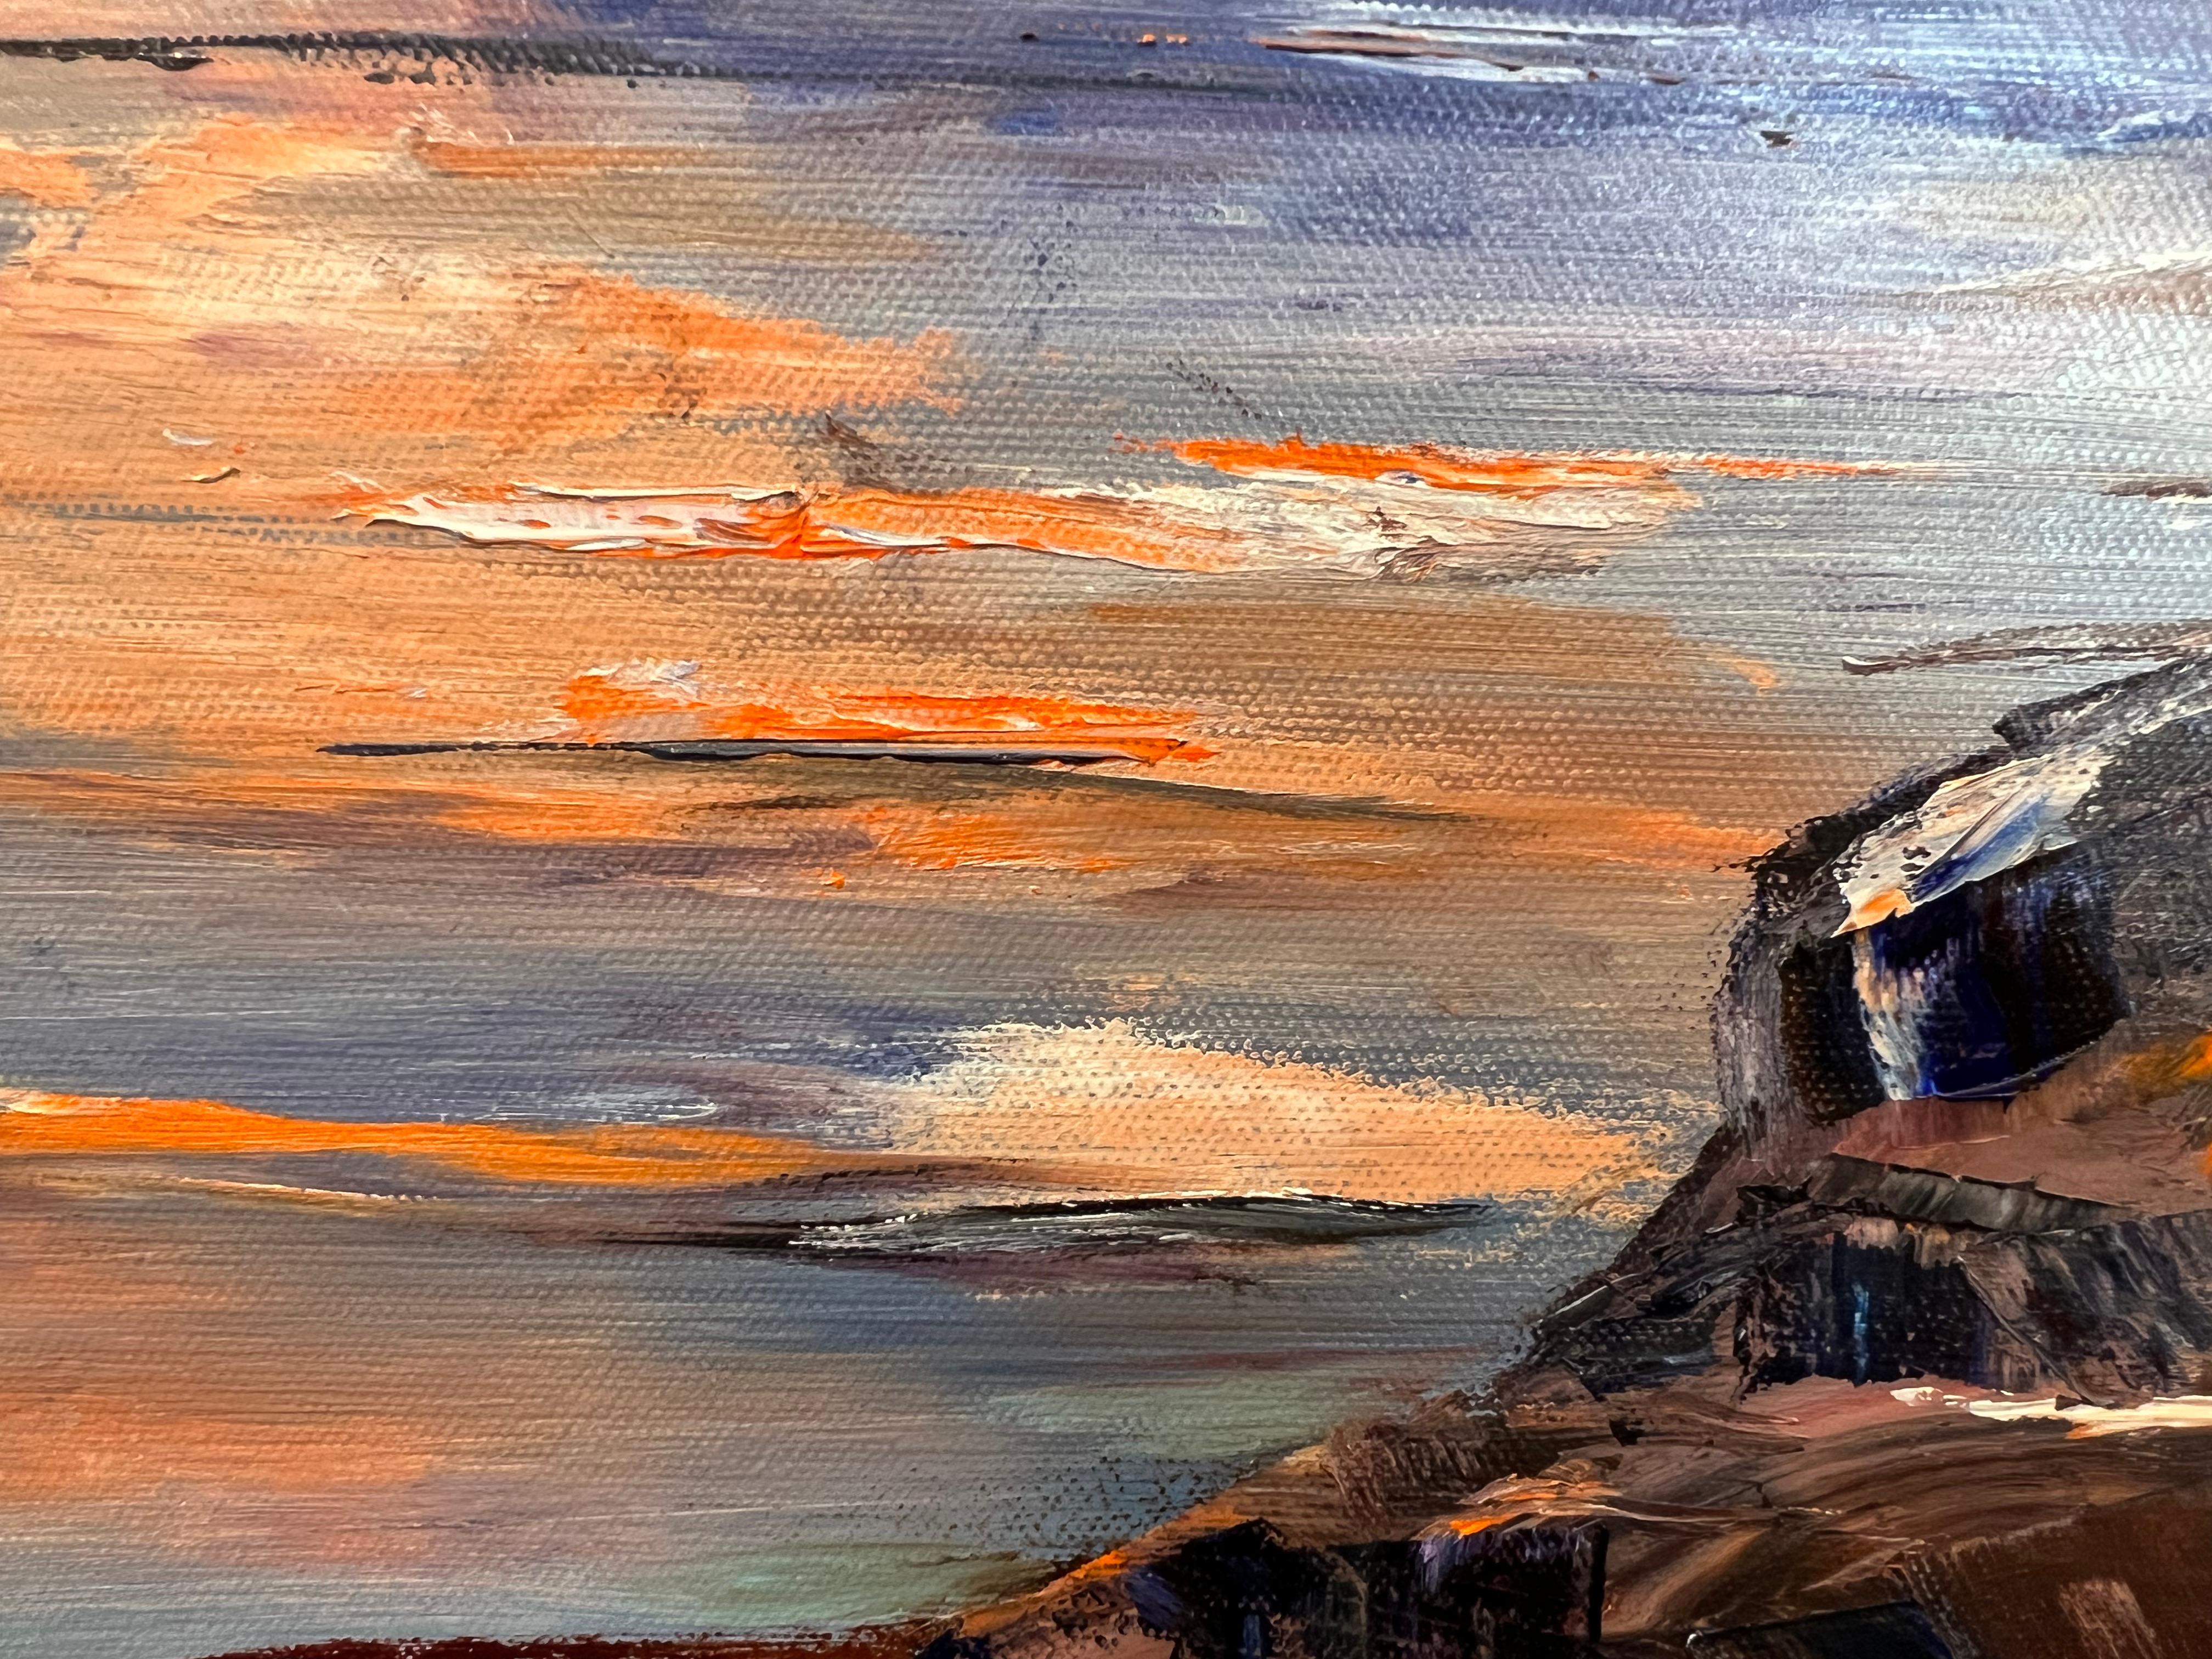 <p>Artist Comments<br>Artist Marilyn Froggatt displays a spectacular perspective of a vast mountain range encompassing Hyalite Lake. The incredible sunset illuminates the majestic sky and reflects on the tranquil surface of the water. 